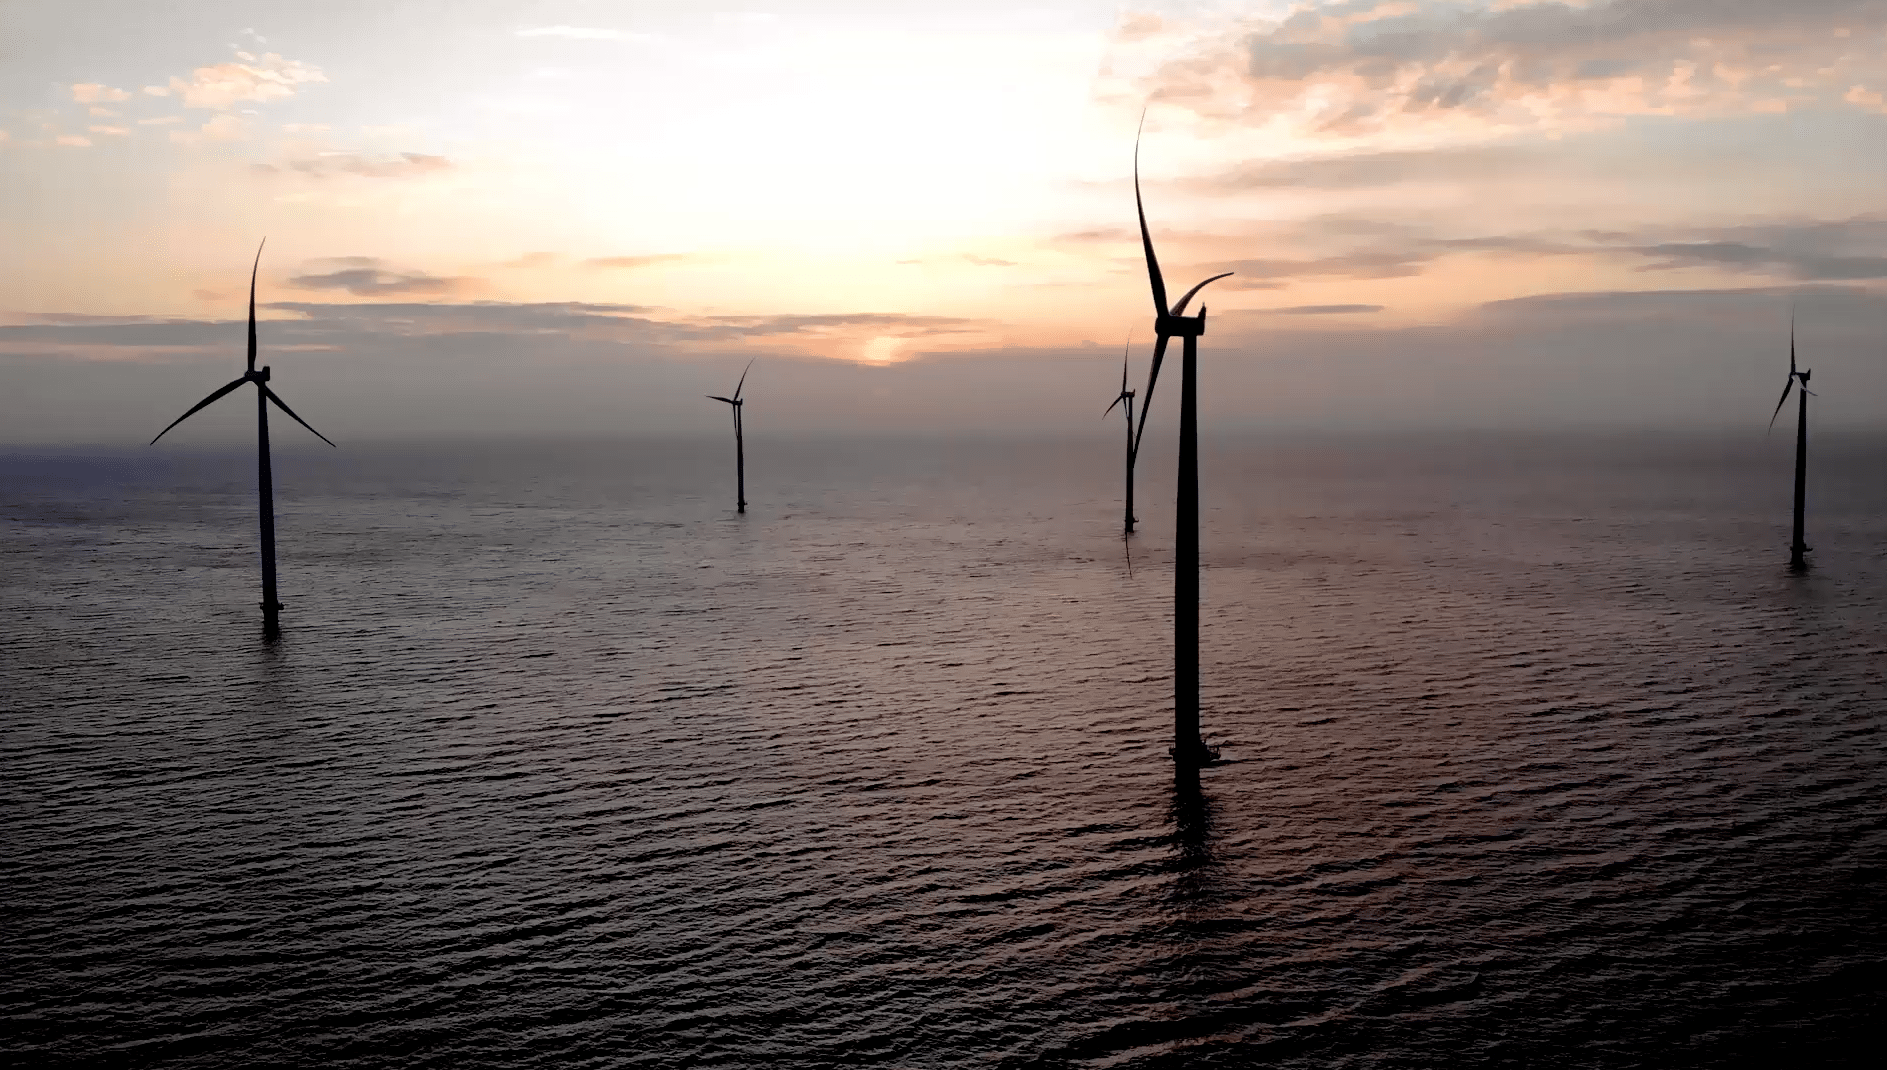 Windmills in the ocean at sunset.